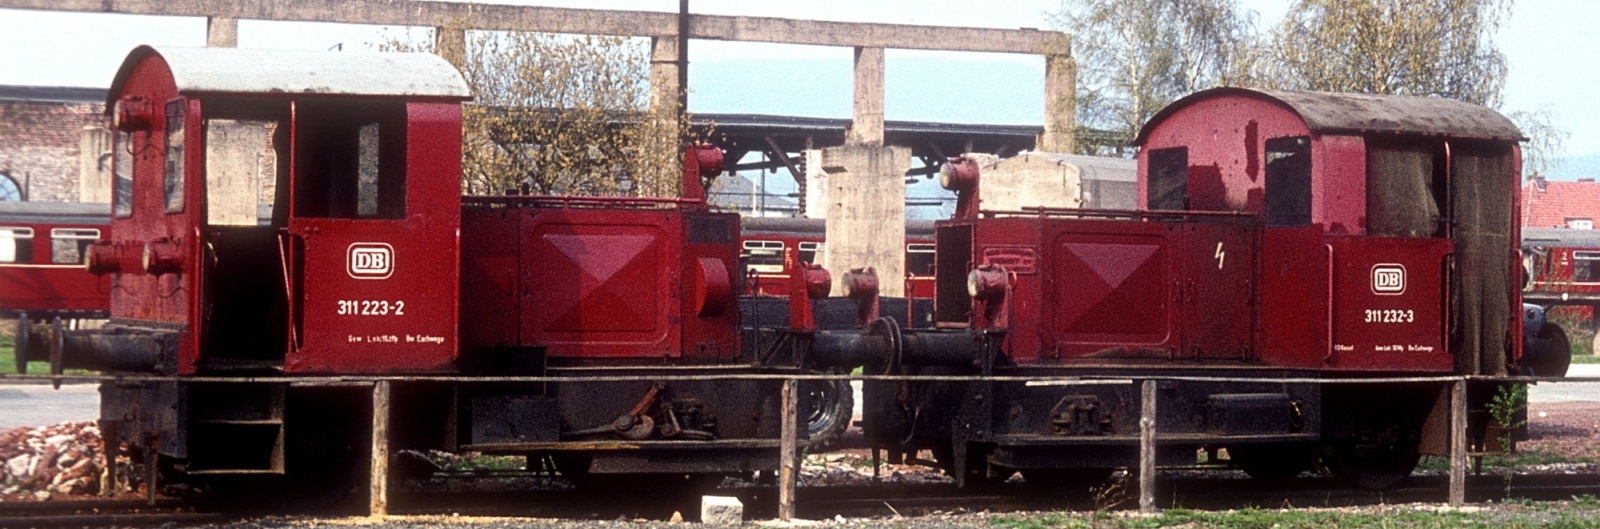 311 223 and 311 232 parked in Eschwege in April 1976 after the end of their service life